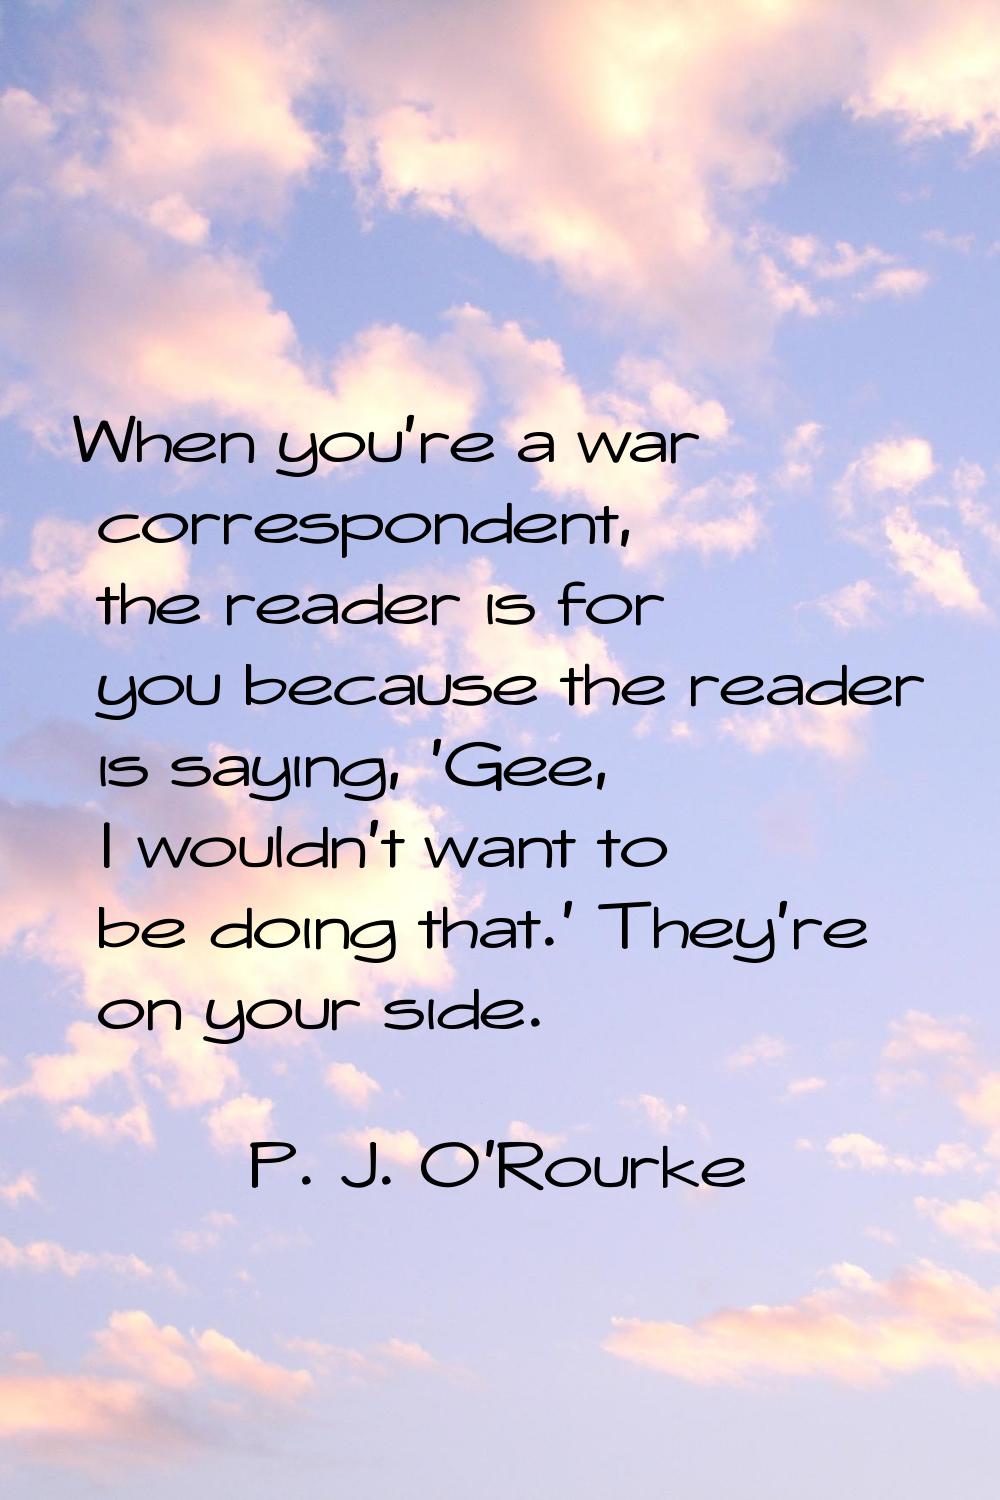 When you're a war correspondent, the reader is for you because the reader is saying, 'Gee, I wouldn